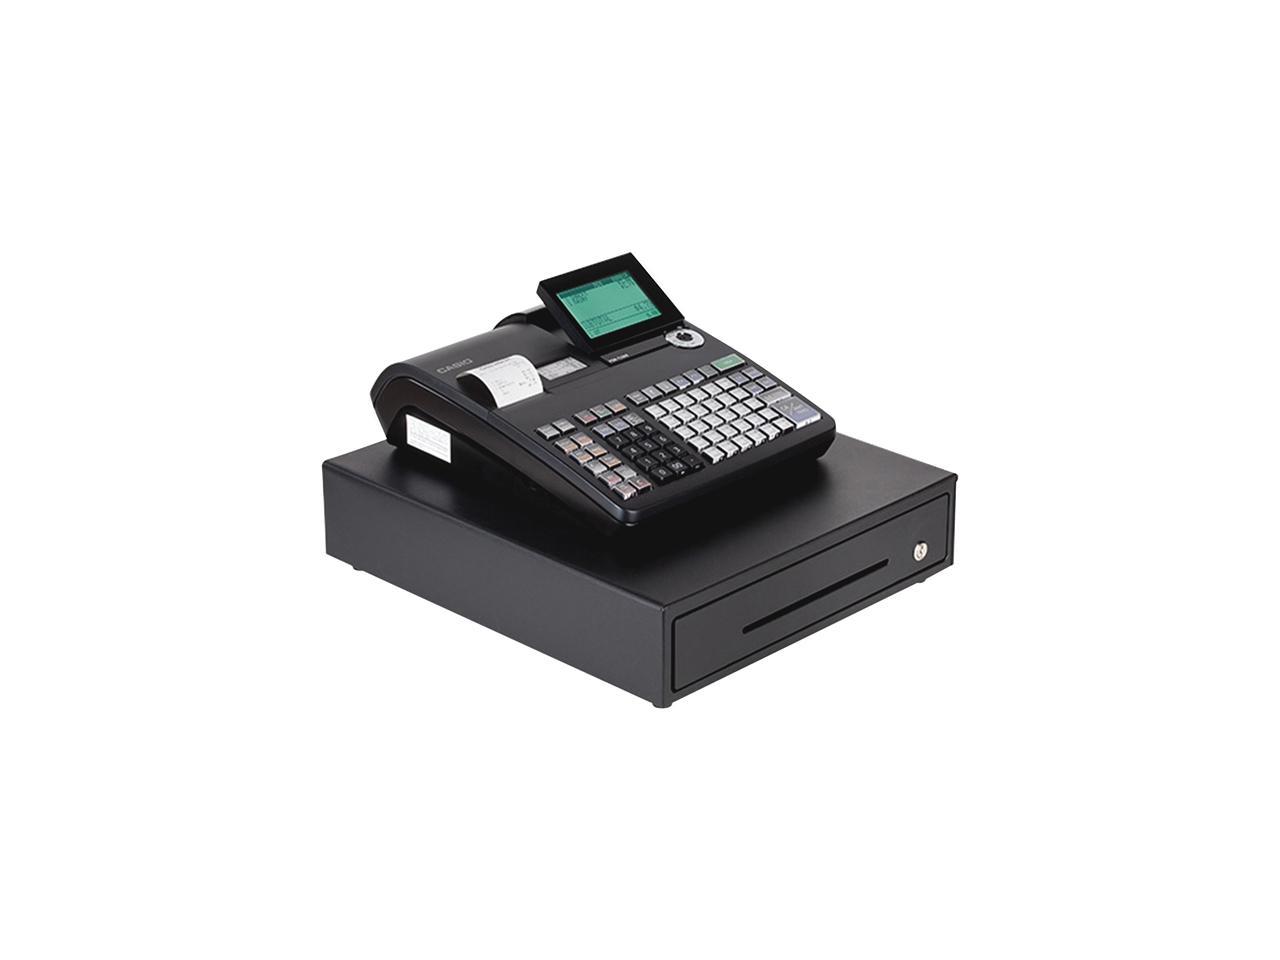 Casio PCR-T2300 Electronic Cash Register With LCD Display - Black